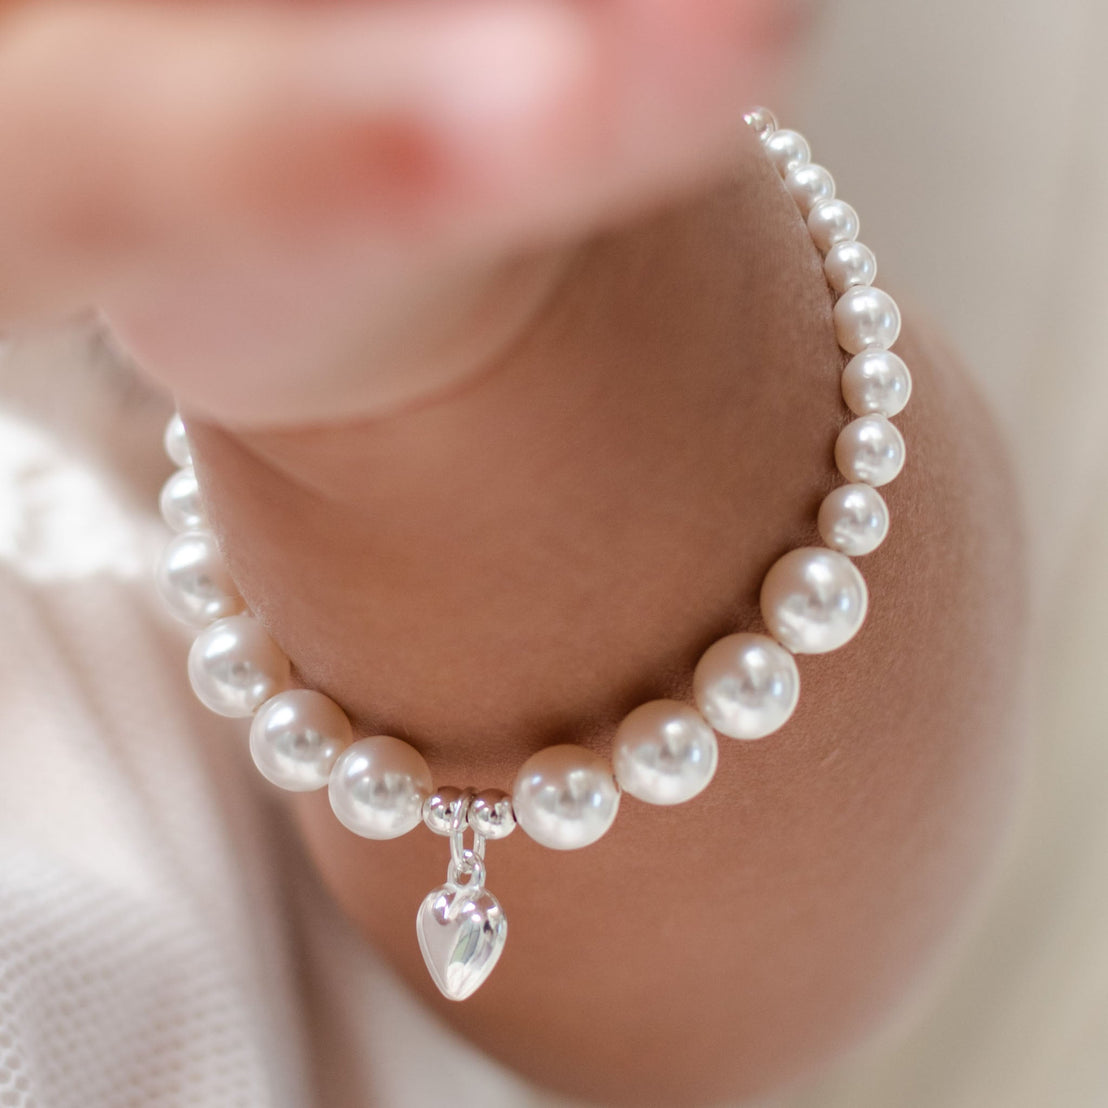 Close-up of an upscale, White Luster Pearl Bracelet with Silver Heart Charm worn around a person's neck. The background is softly blurred.